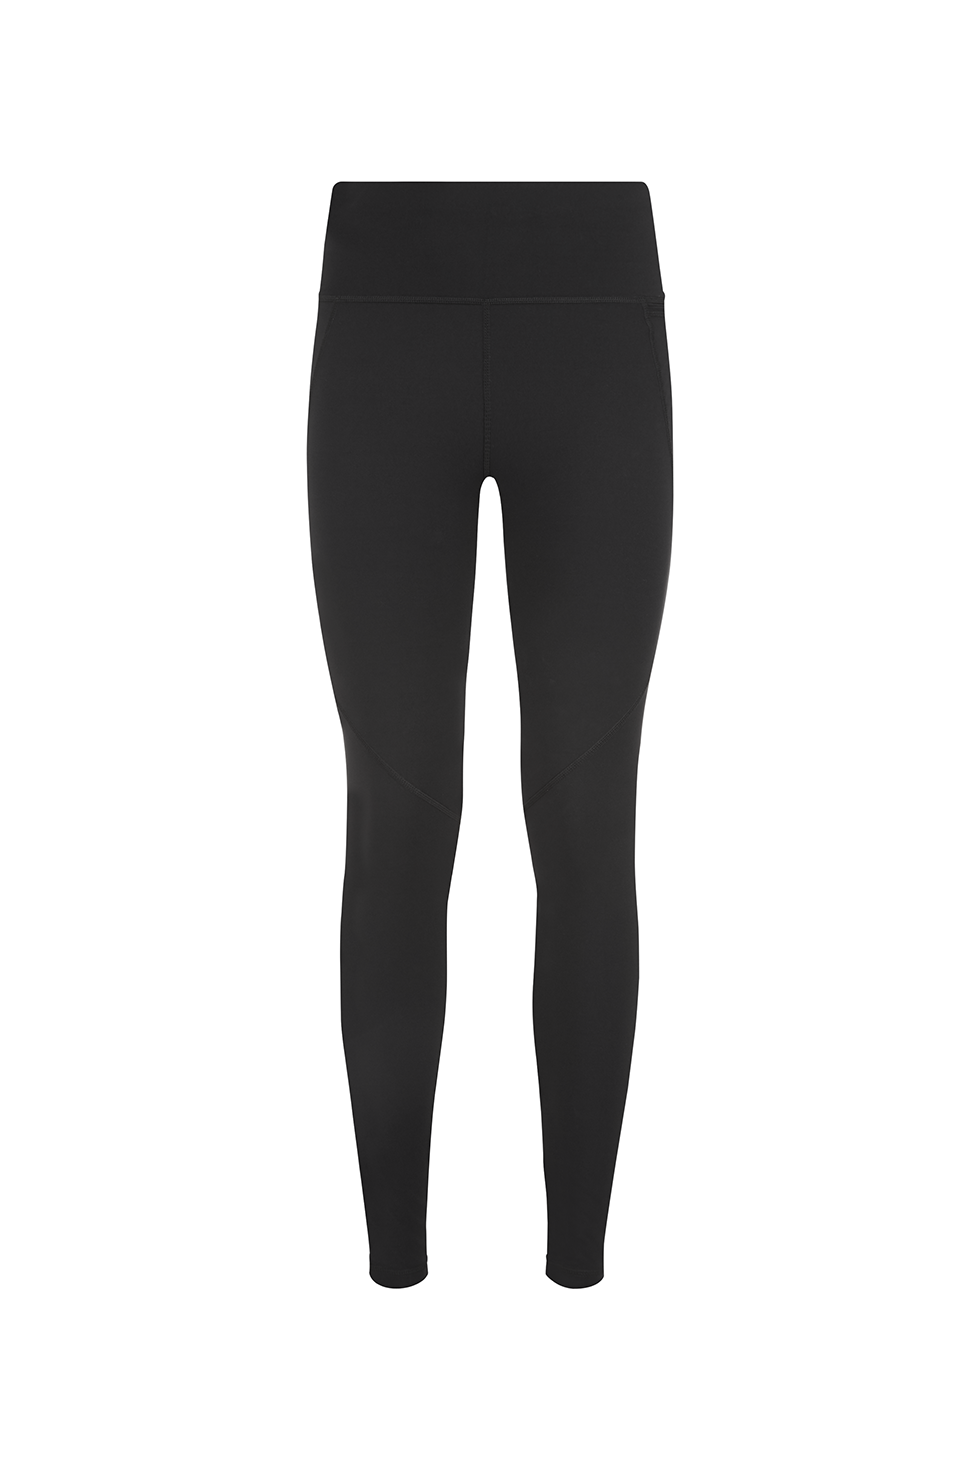 ELLE SPORTS/ GYM LEGGINGS BLACK AVAILABLE SMALL-LARGE